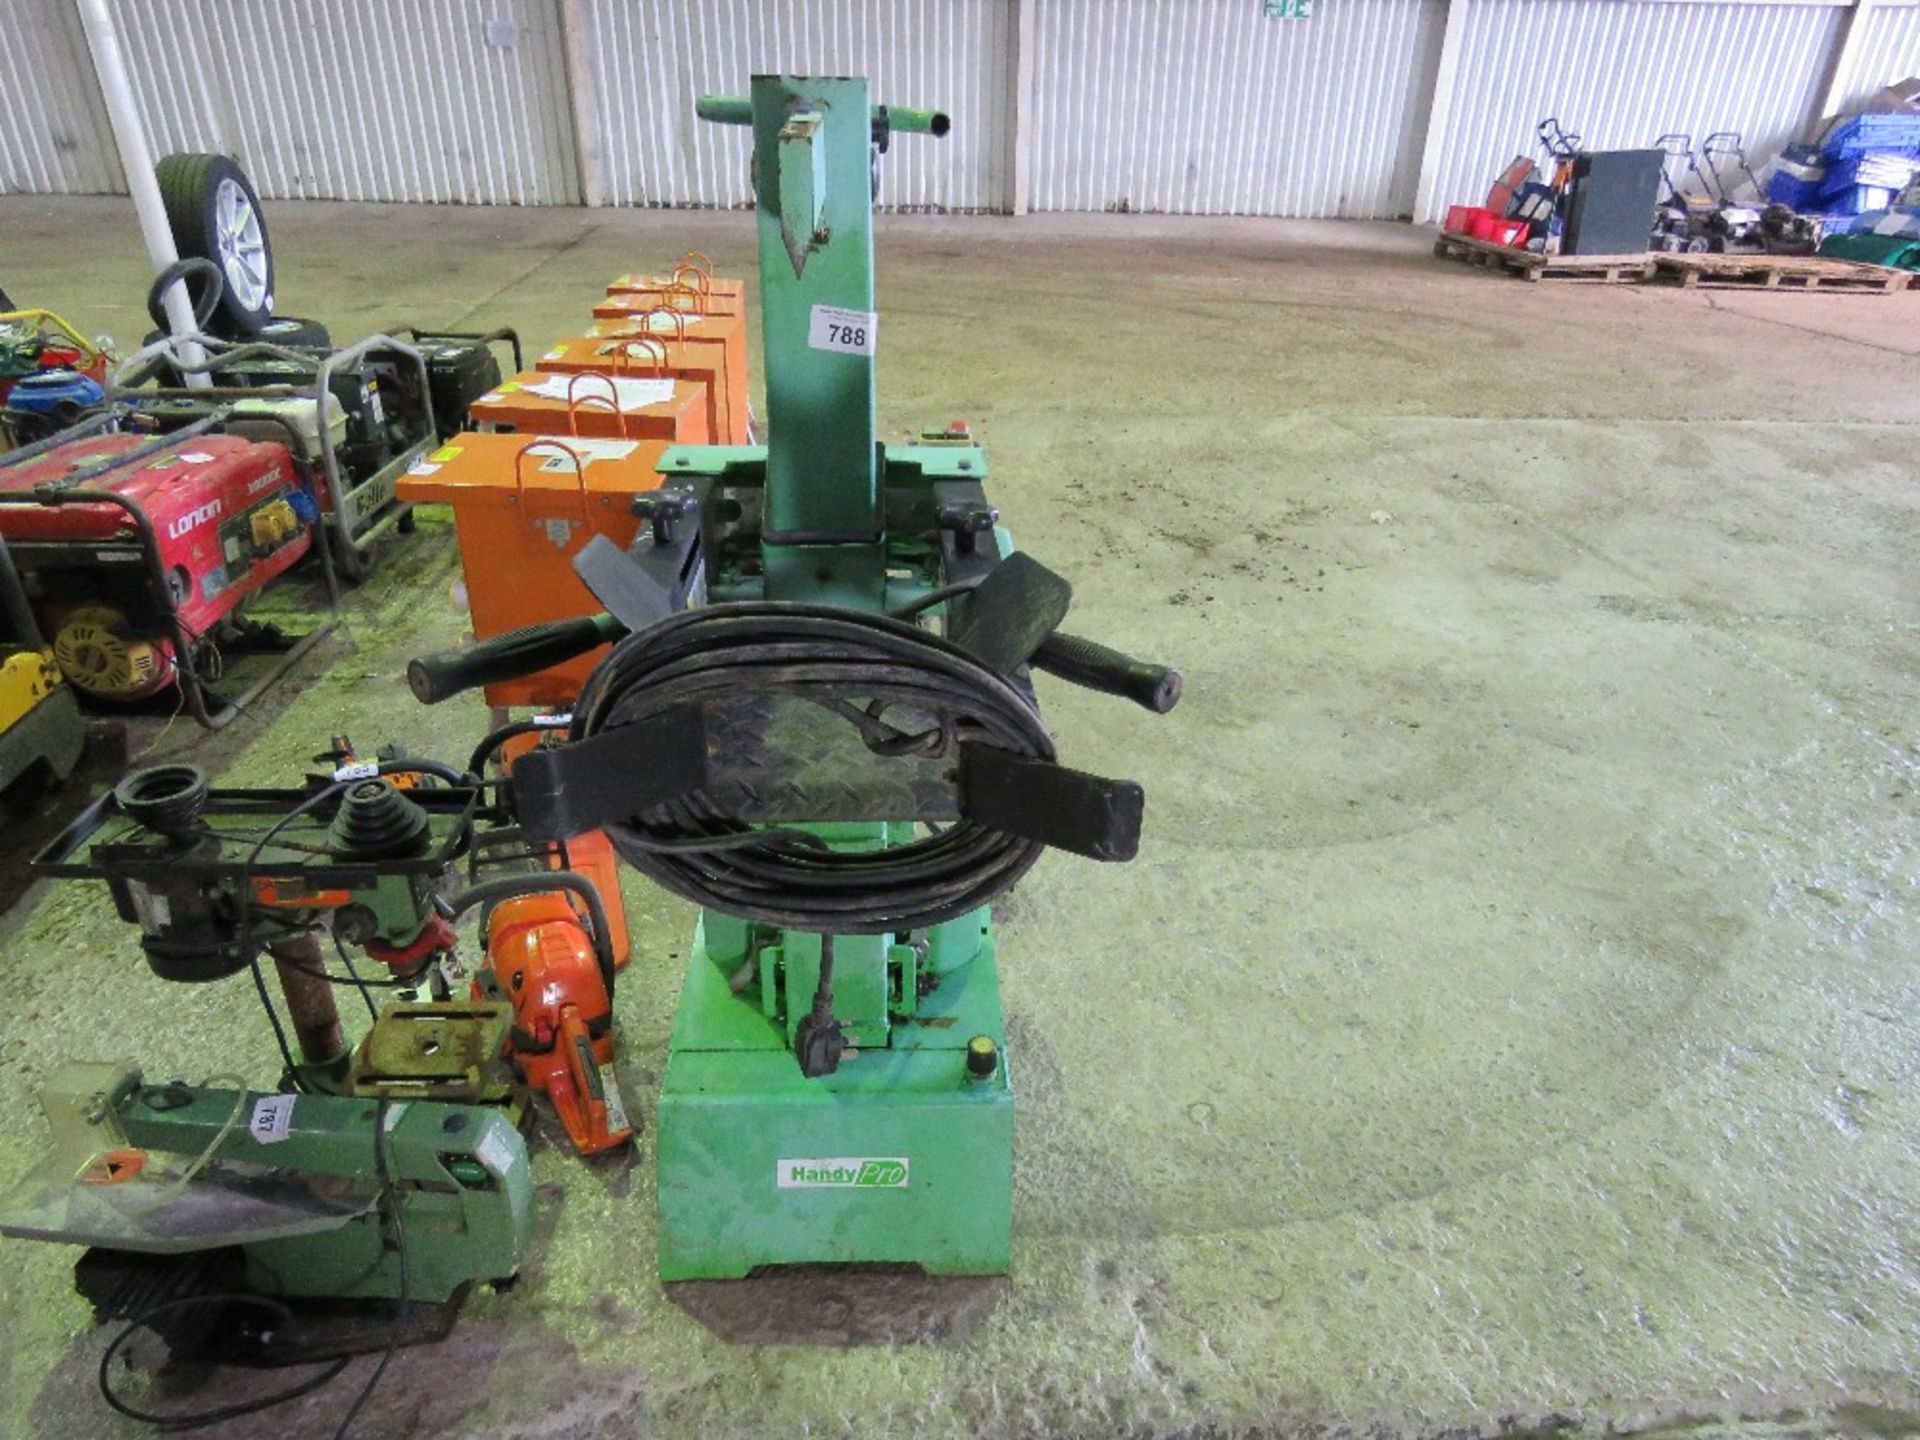 HANDYPRO 240VOLT POWERED UPRIGHT LOG SPLITTER, CONDITION UNKNOWN. THIS LOT IS SOLD UNDER THE AUCT - Image 2 of 5